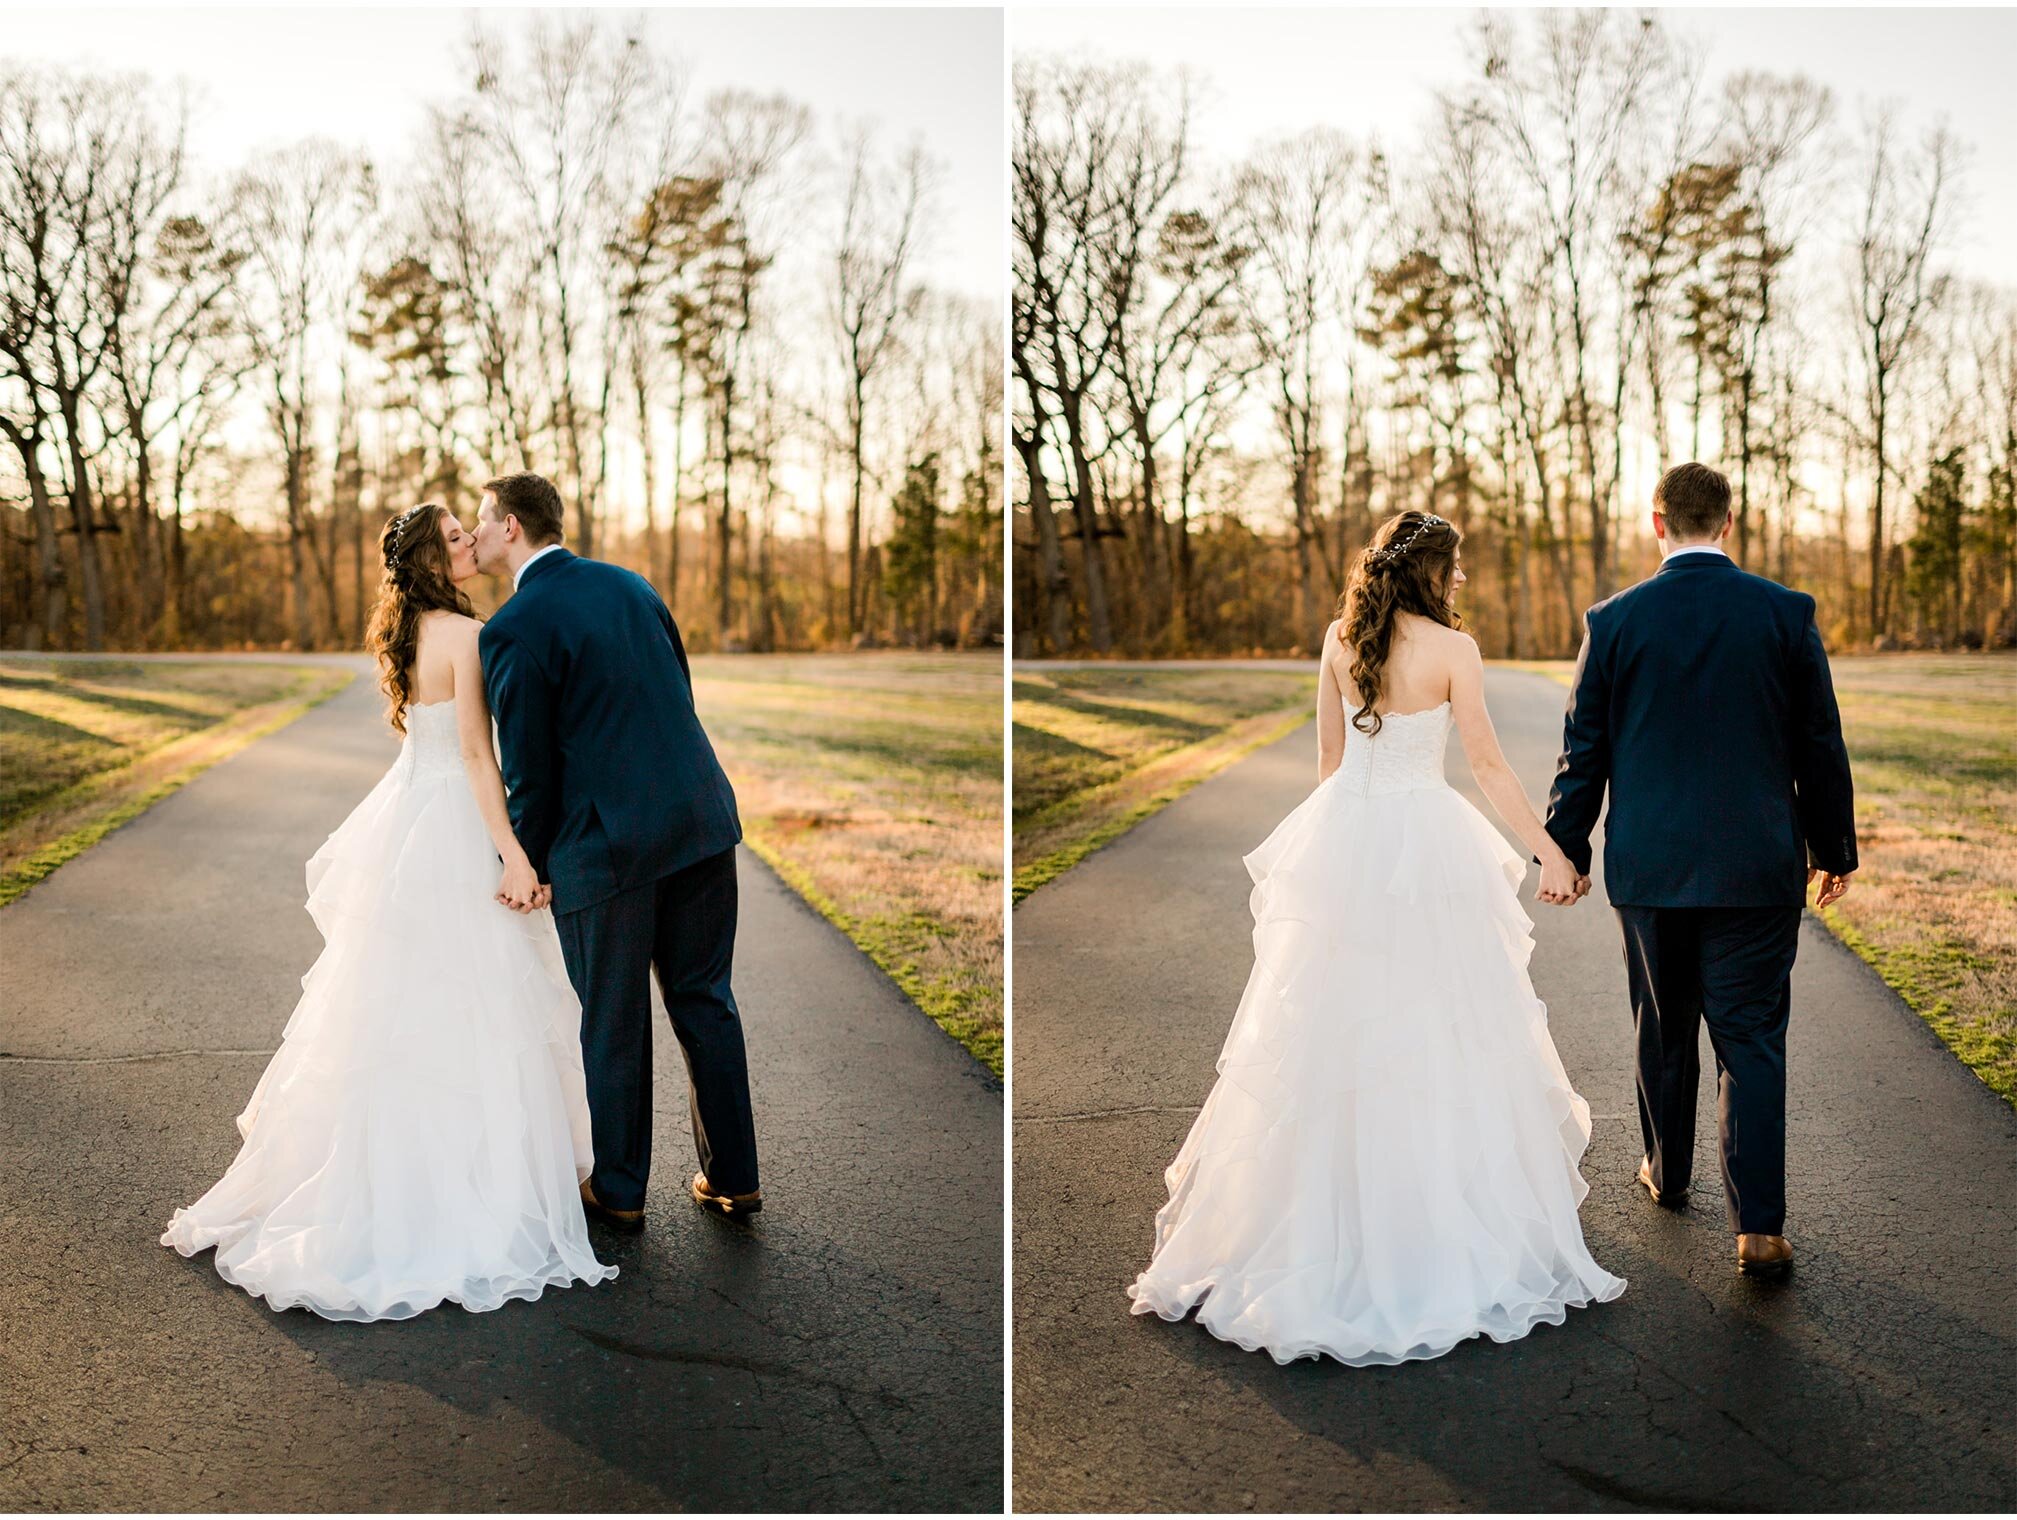 Durham Wedding Photographer | By G. Lin Photography | Bride and groom walking together on pavement